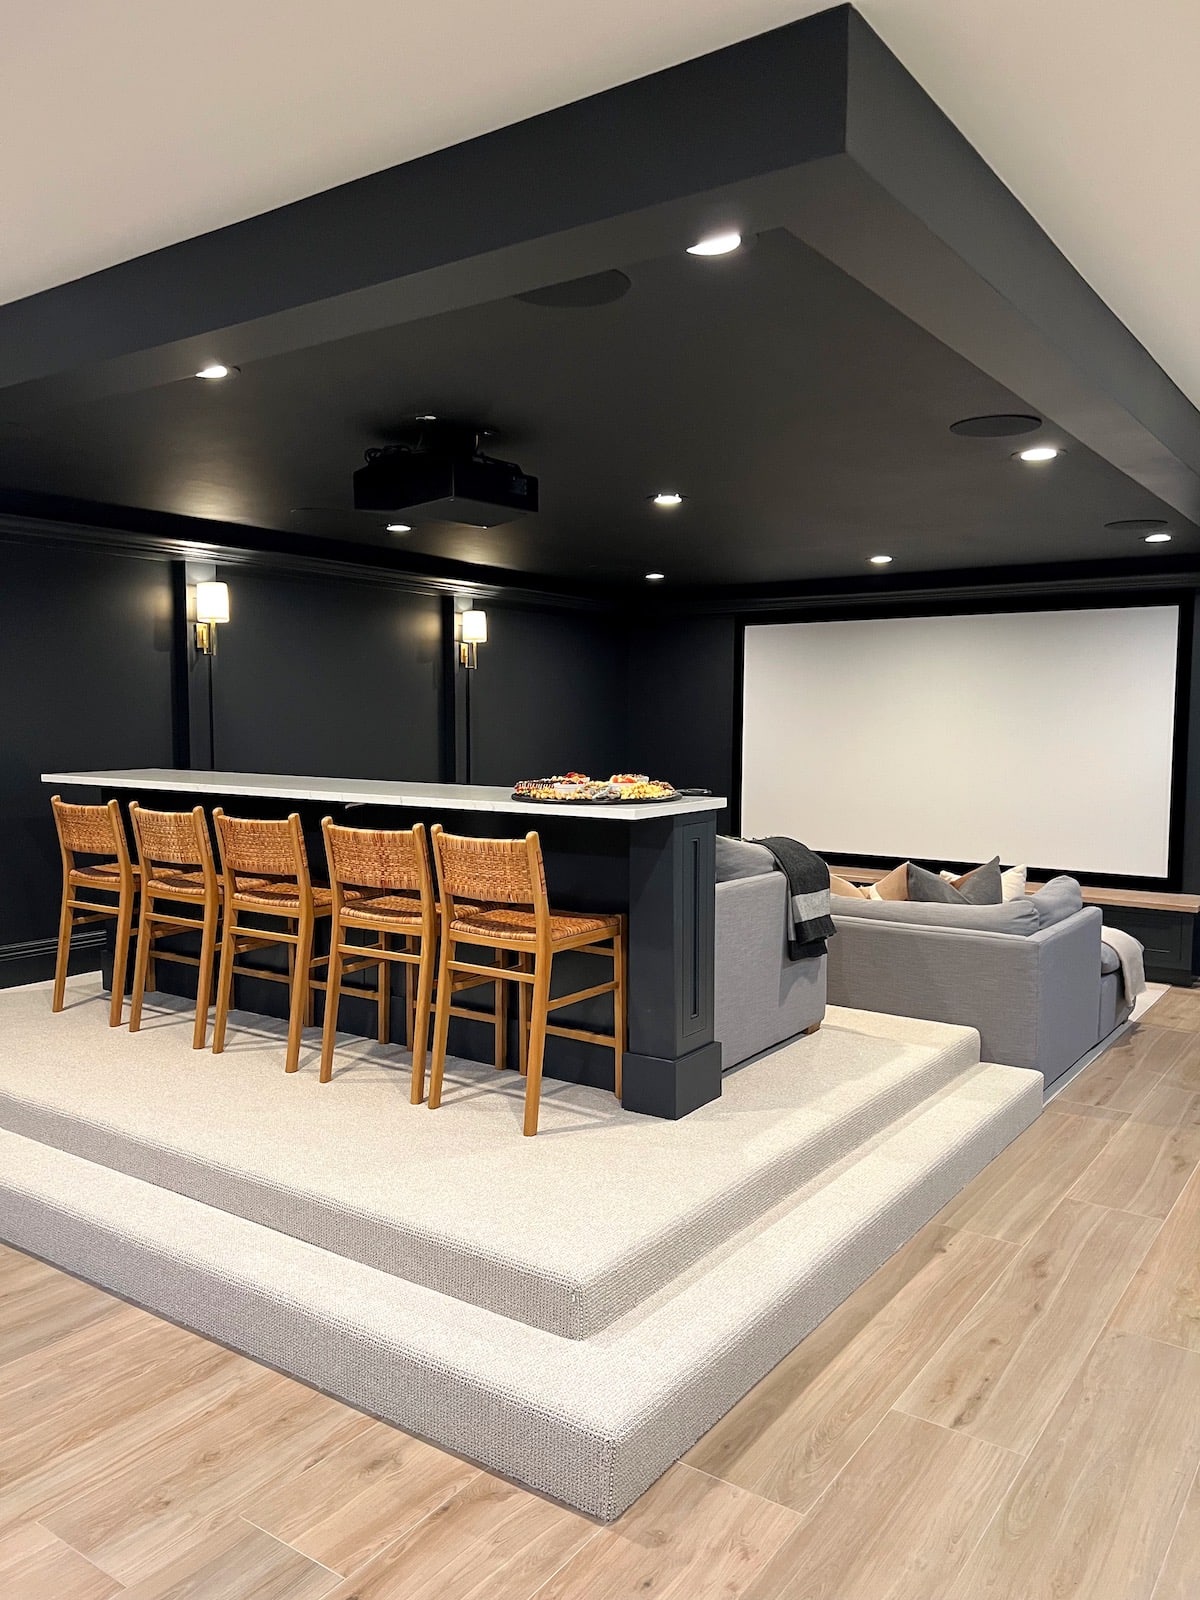 basement theatre room with bar and bar stools. 